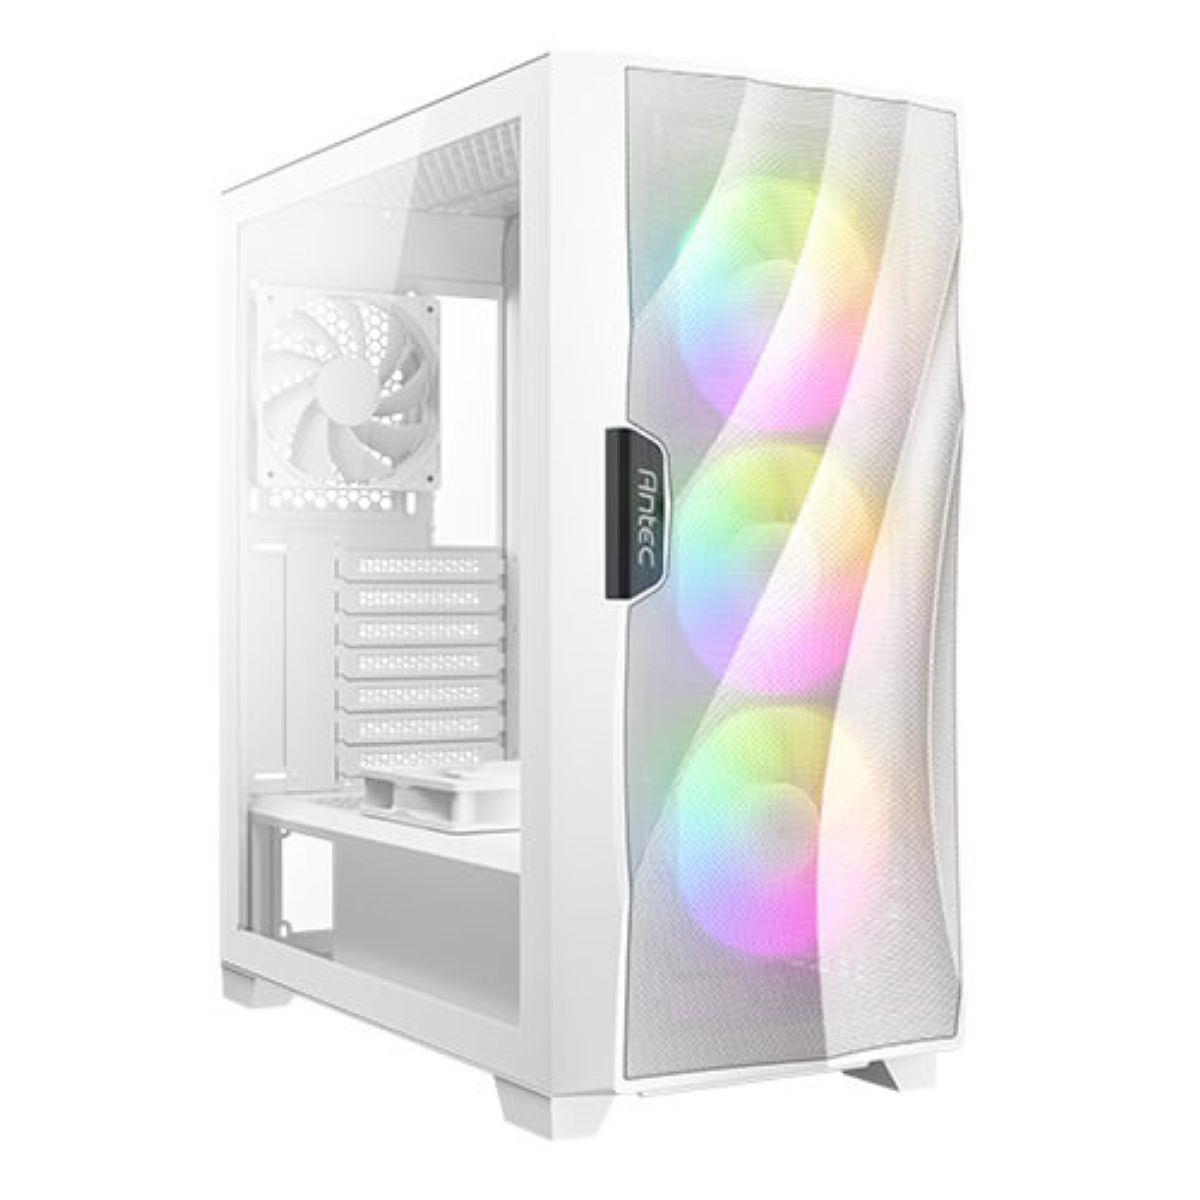 Image of Antec DF700 Flux ARGB Tempered Glass ATX Mid-Tower Gaming Computer Case